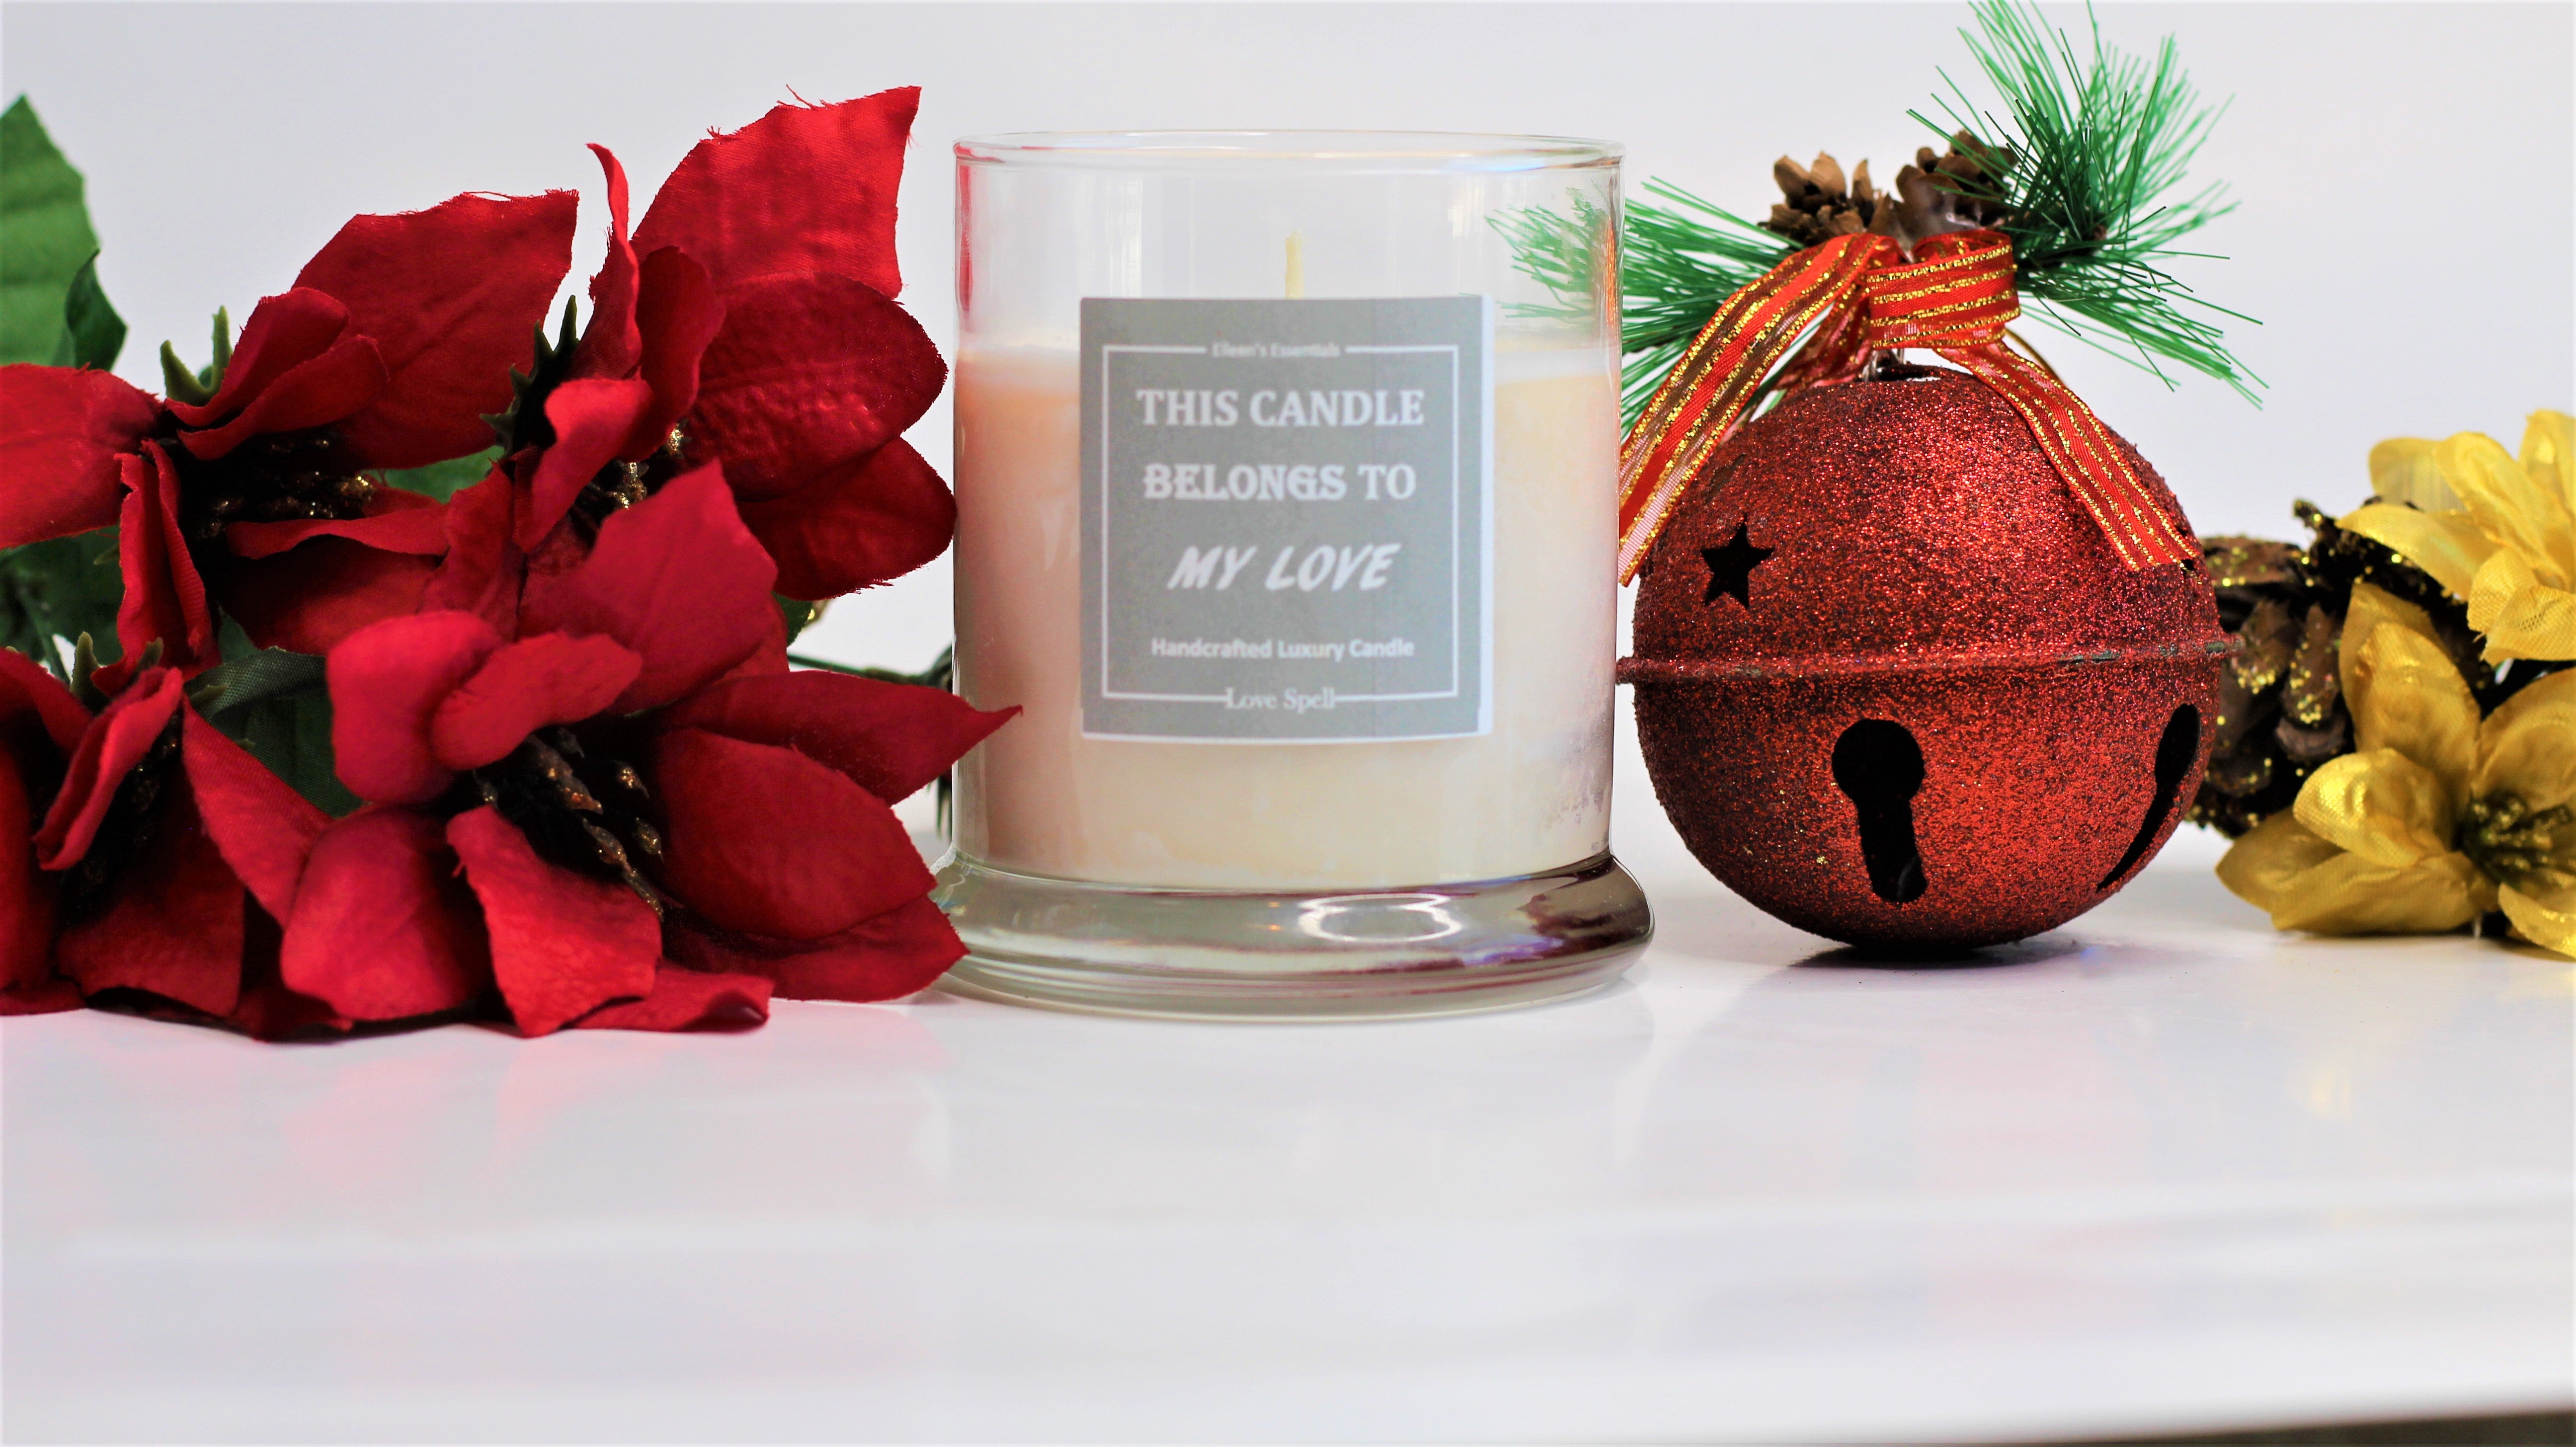 Signature Scent; THIS CANDLE BELONGS TO MY LOVE